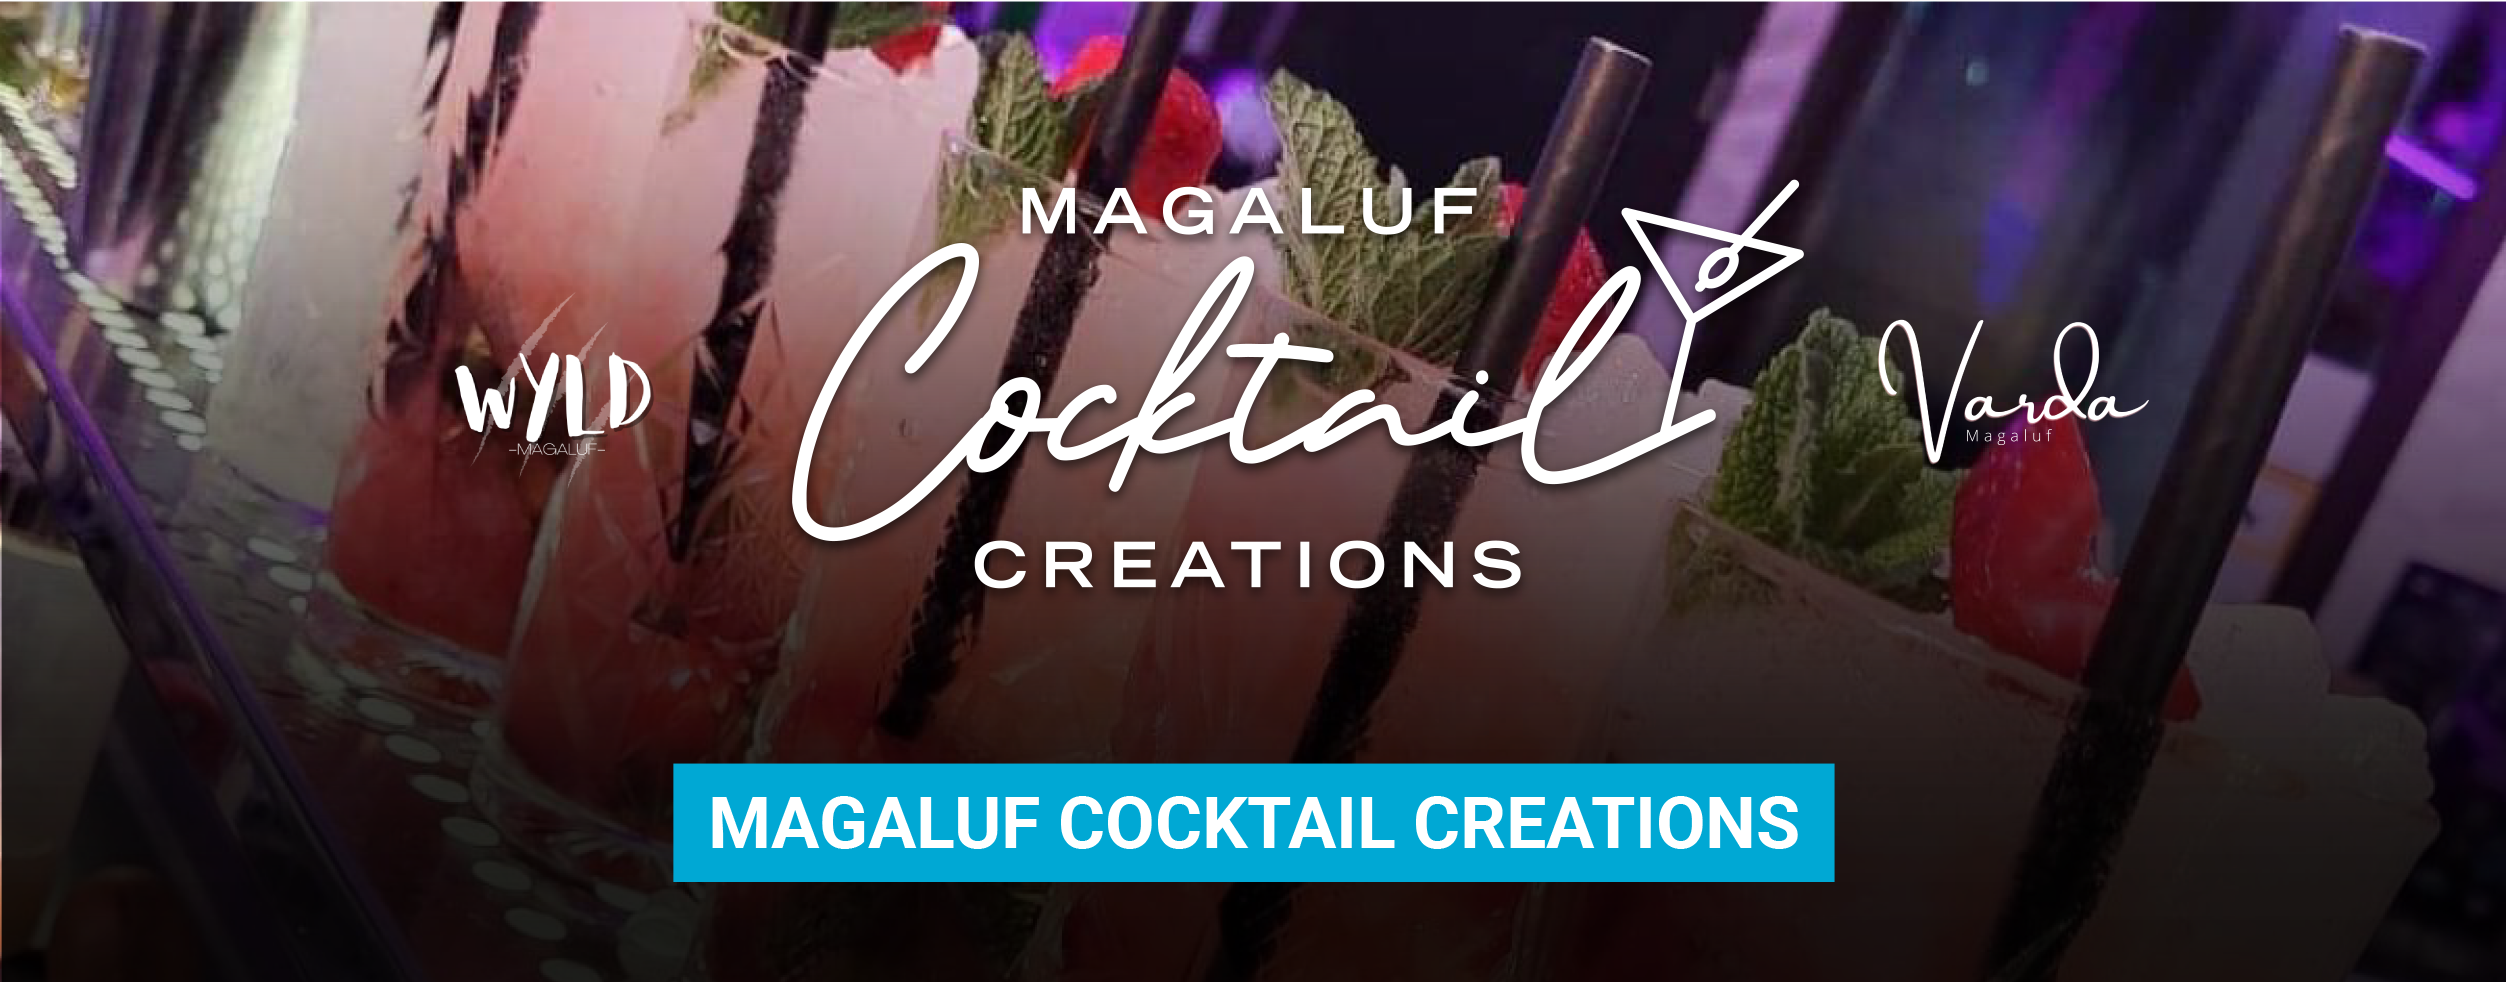 Magaluf Cocktail Creation